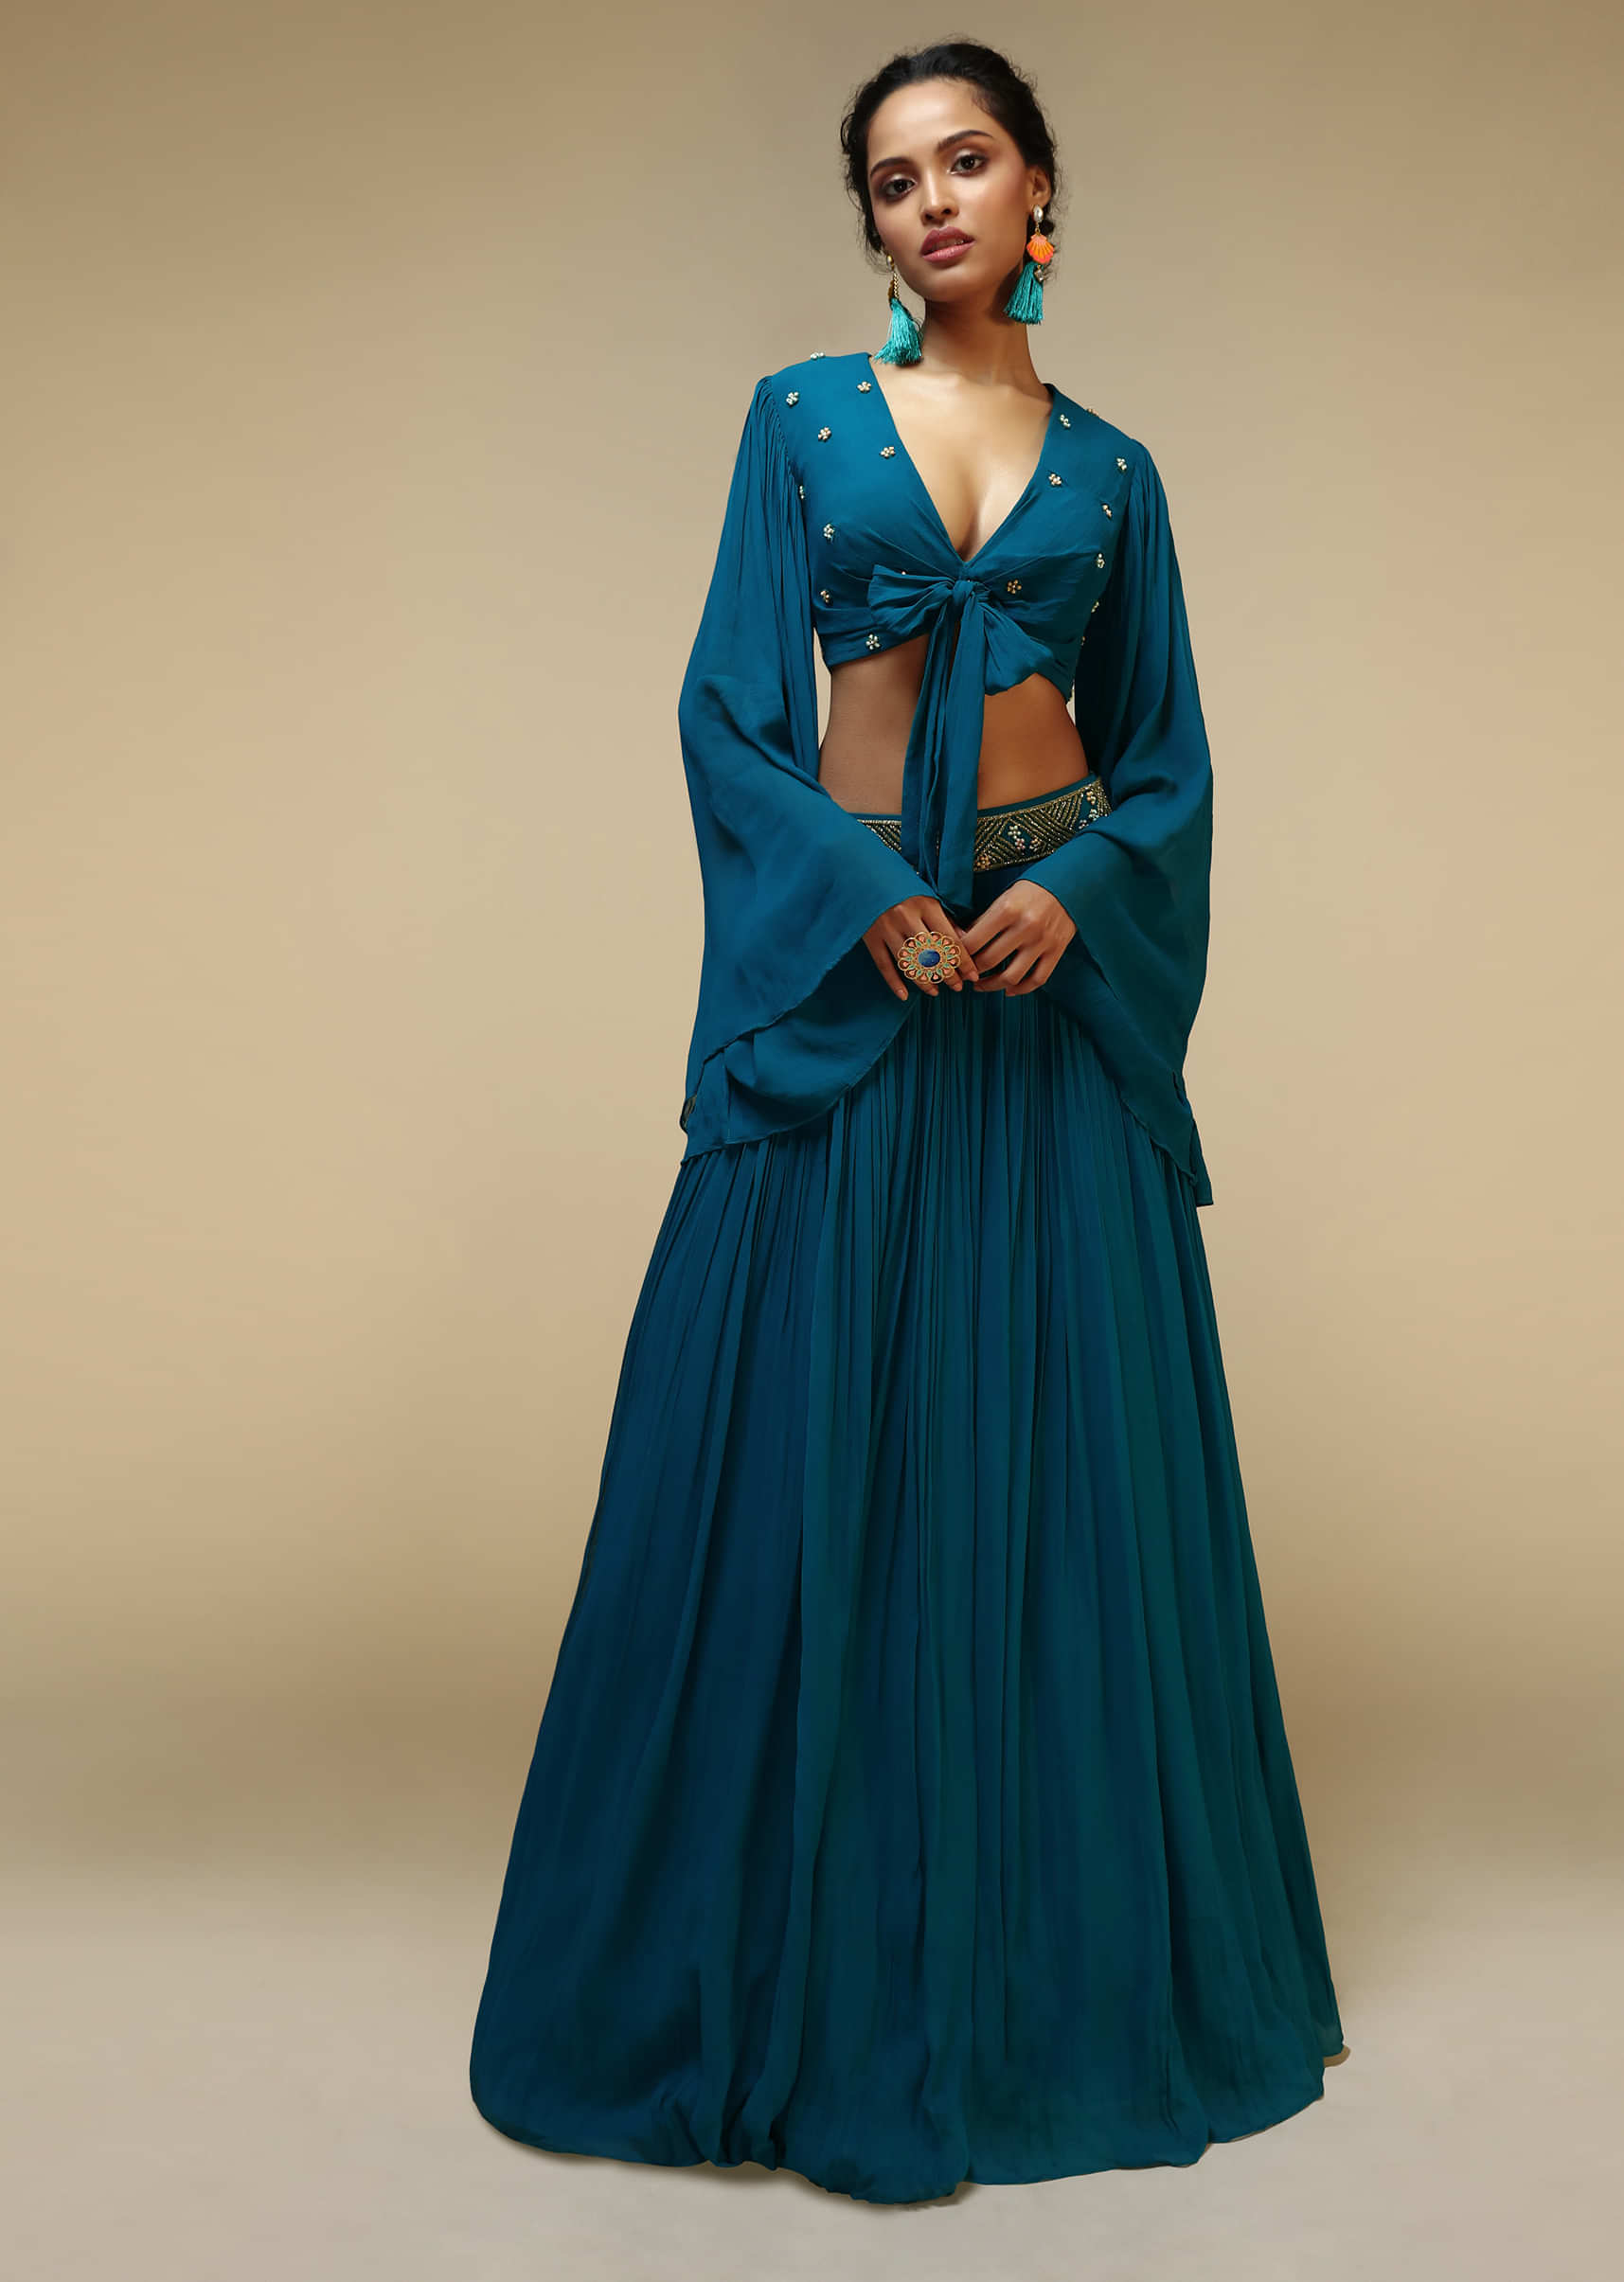 Teal Blue Skirt And Bell Sleeves Crop Top With Front Bow Tie Up Design And Multi Colored Sequin Embroidered Buttis 